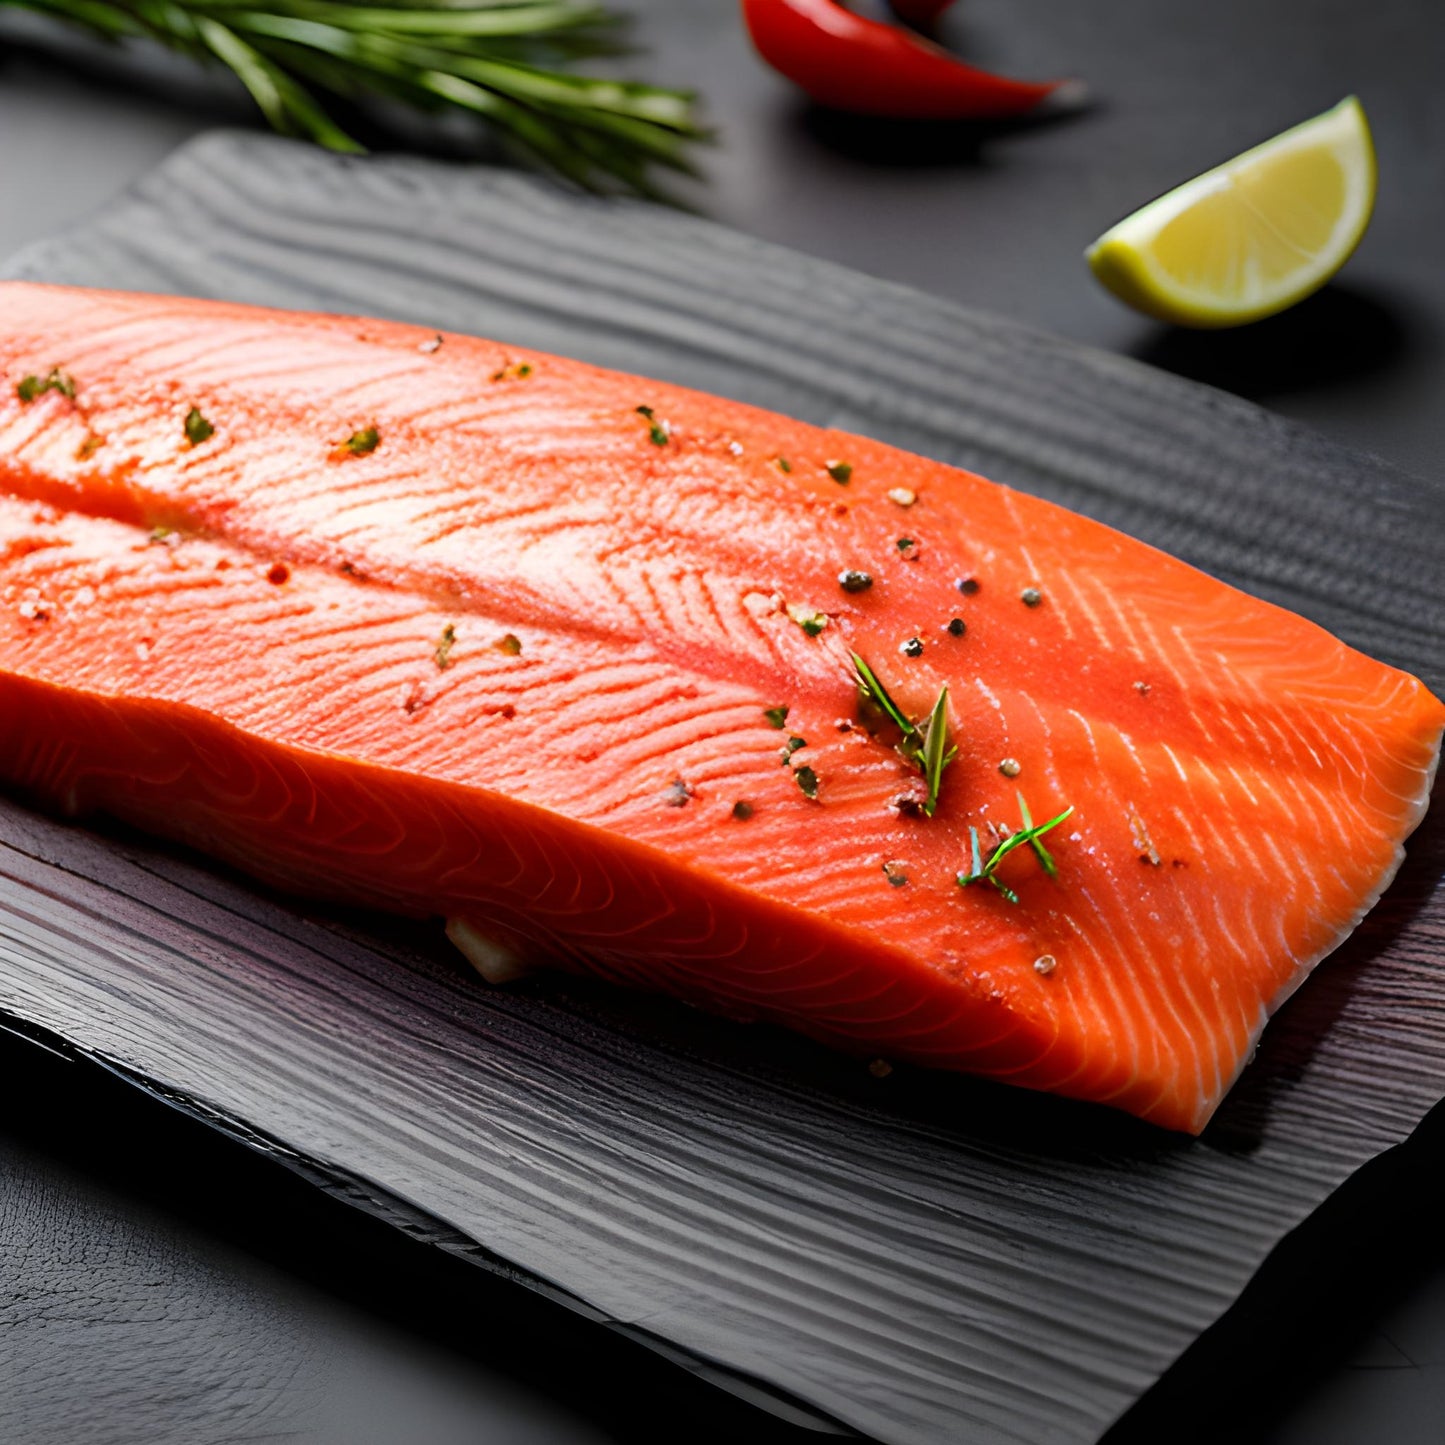 Wild Caught Sockeye Salmon Fillets *Save 1.00 Per Lb when you buy 15 Lb's or more*